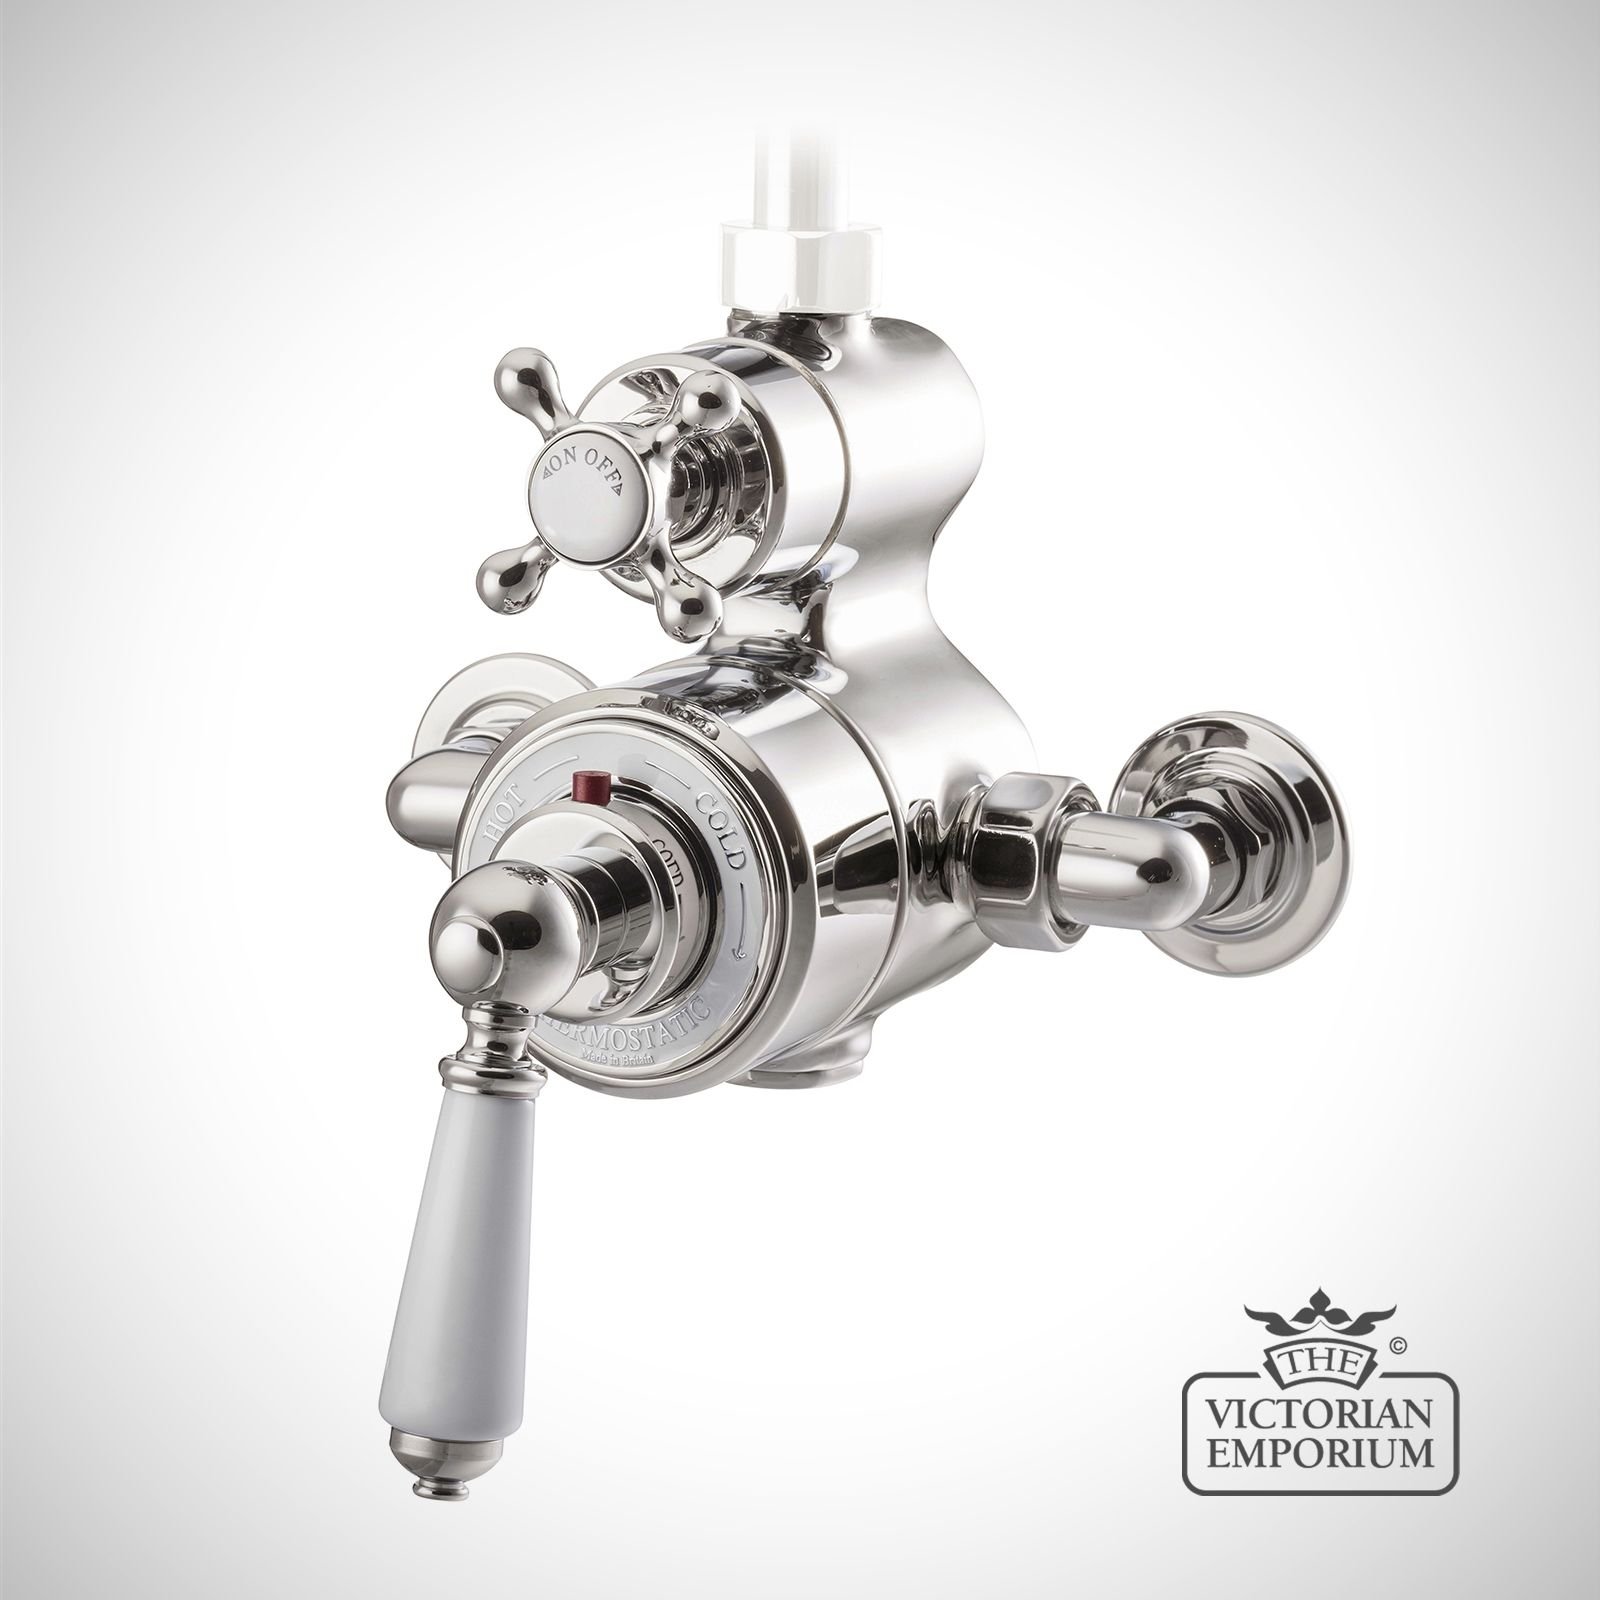 Exposed Thermostatic Shower Valve - in Chrome, Nickel or Copper